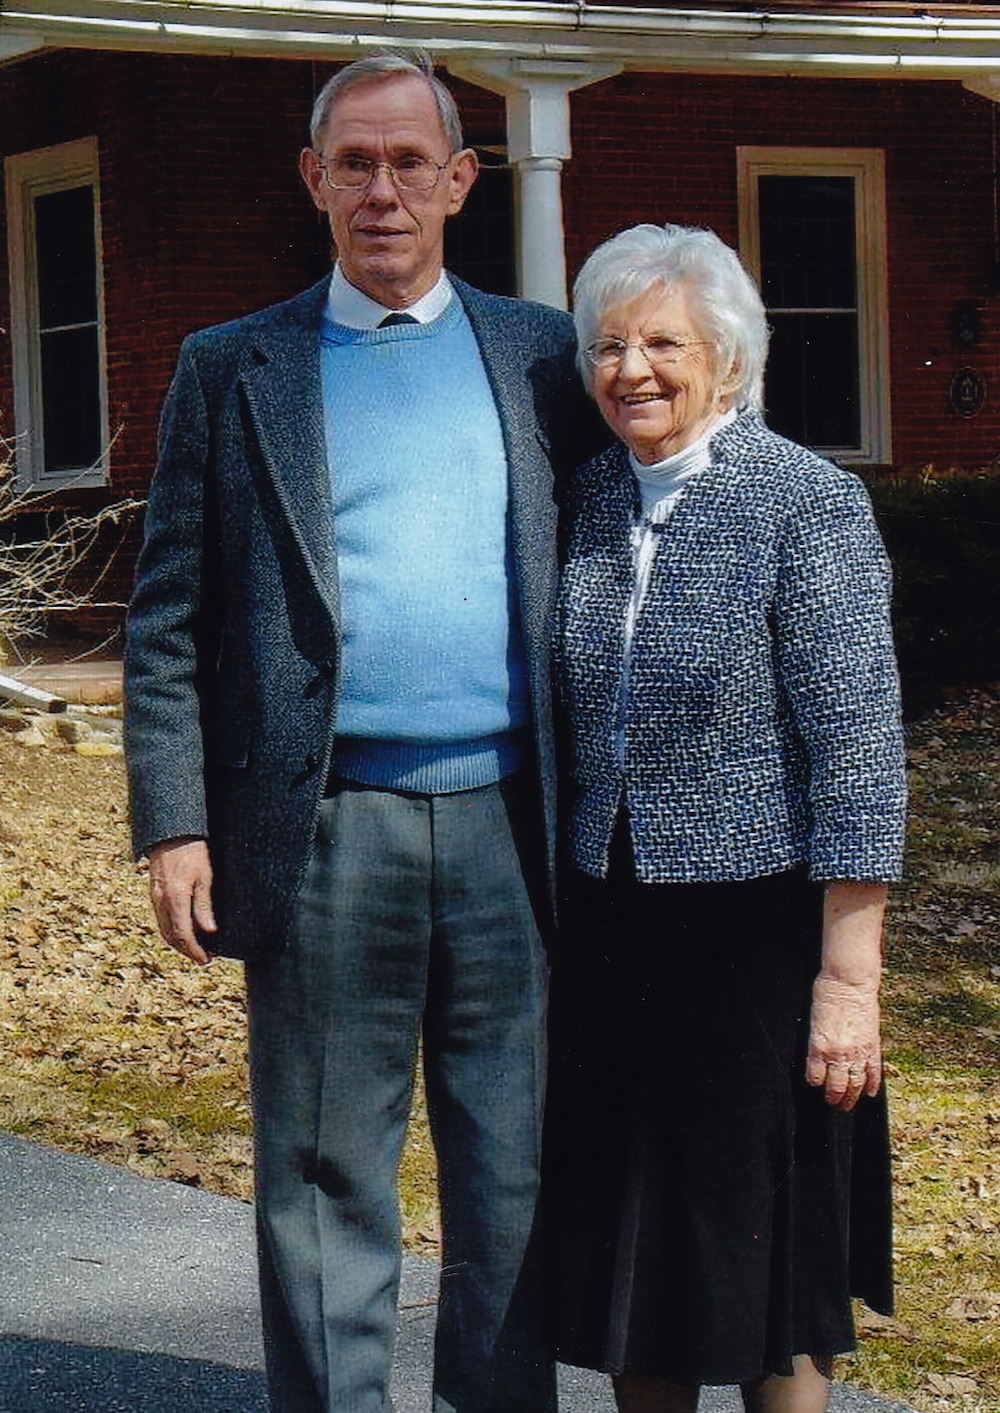 Reflecting on 60 years of marriage